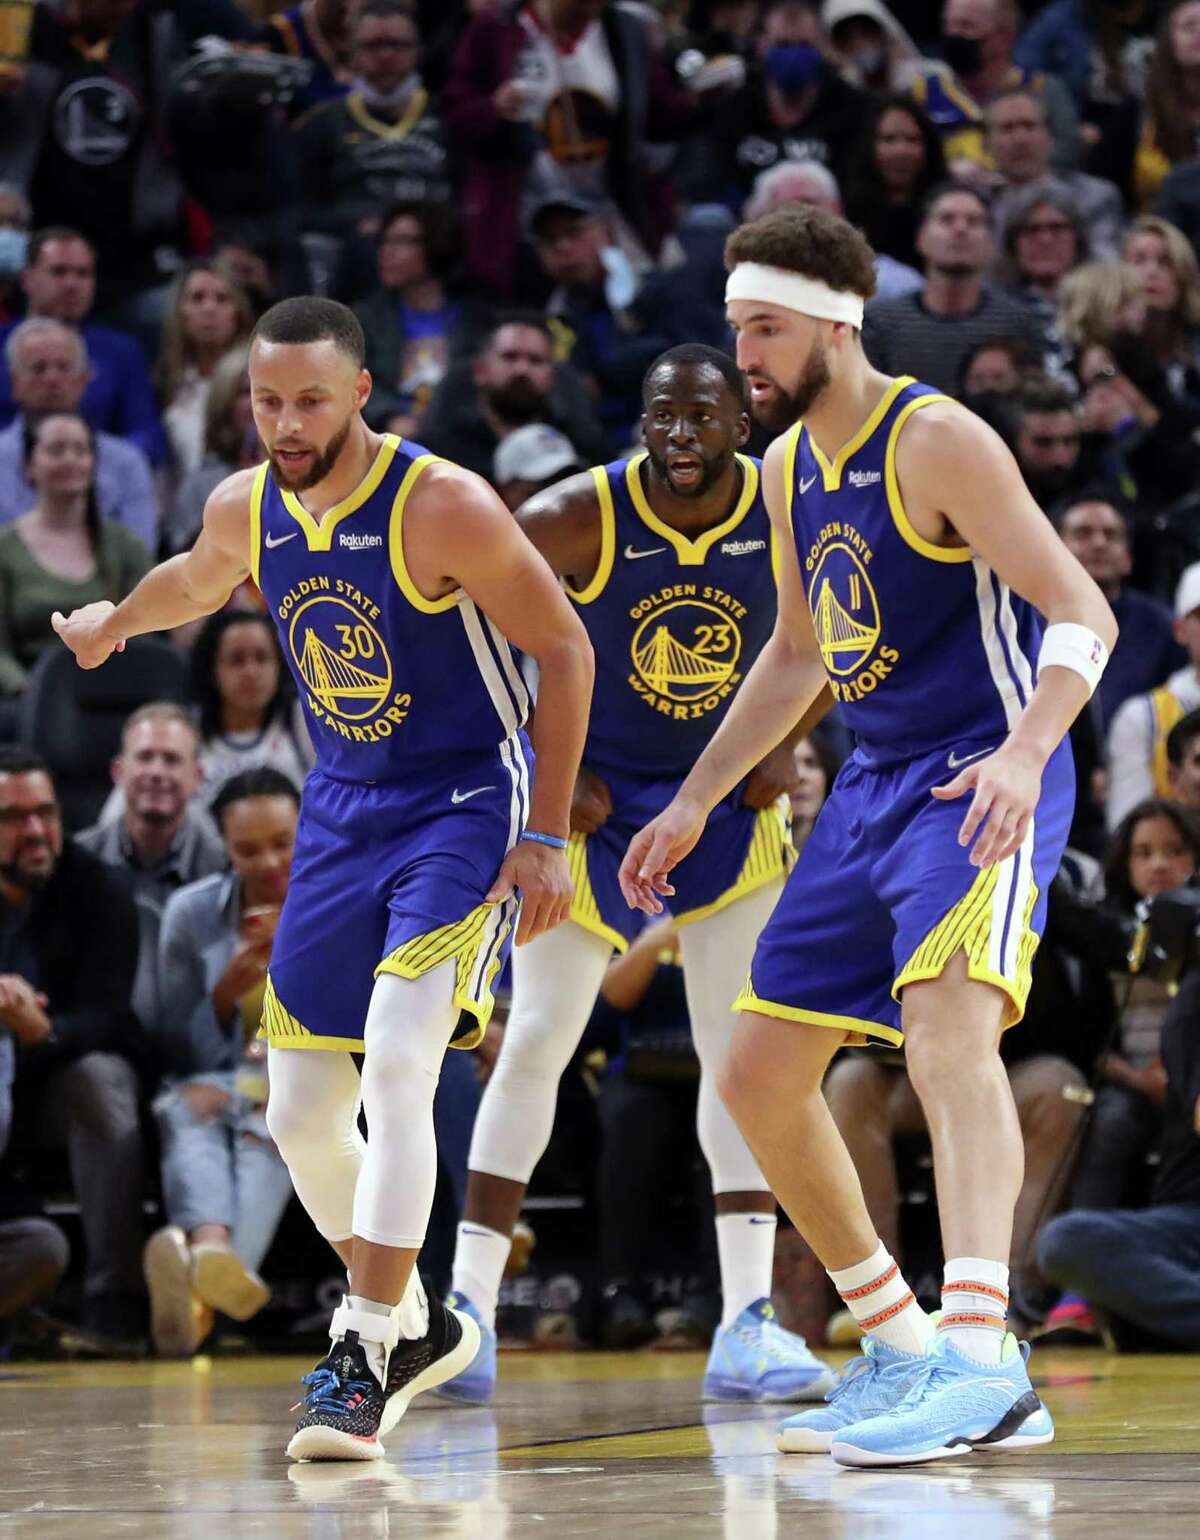 Golden State Warriors' Stephen Curry, Draymond Green and Klay Thompson play defense in 2nd quarter against Washington Wizards during NBA game at Chase Center in San Francisco, Calif., on Monday, March 14, 2022.